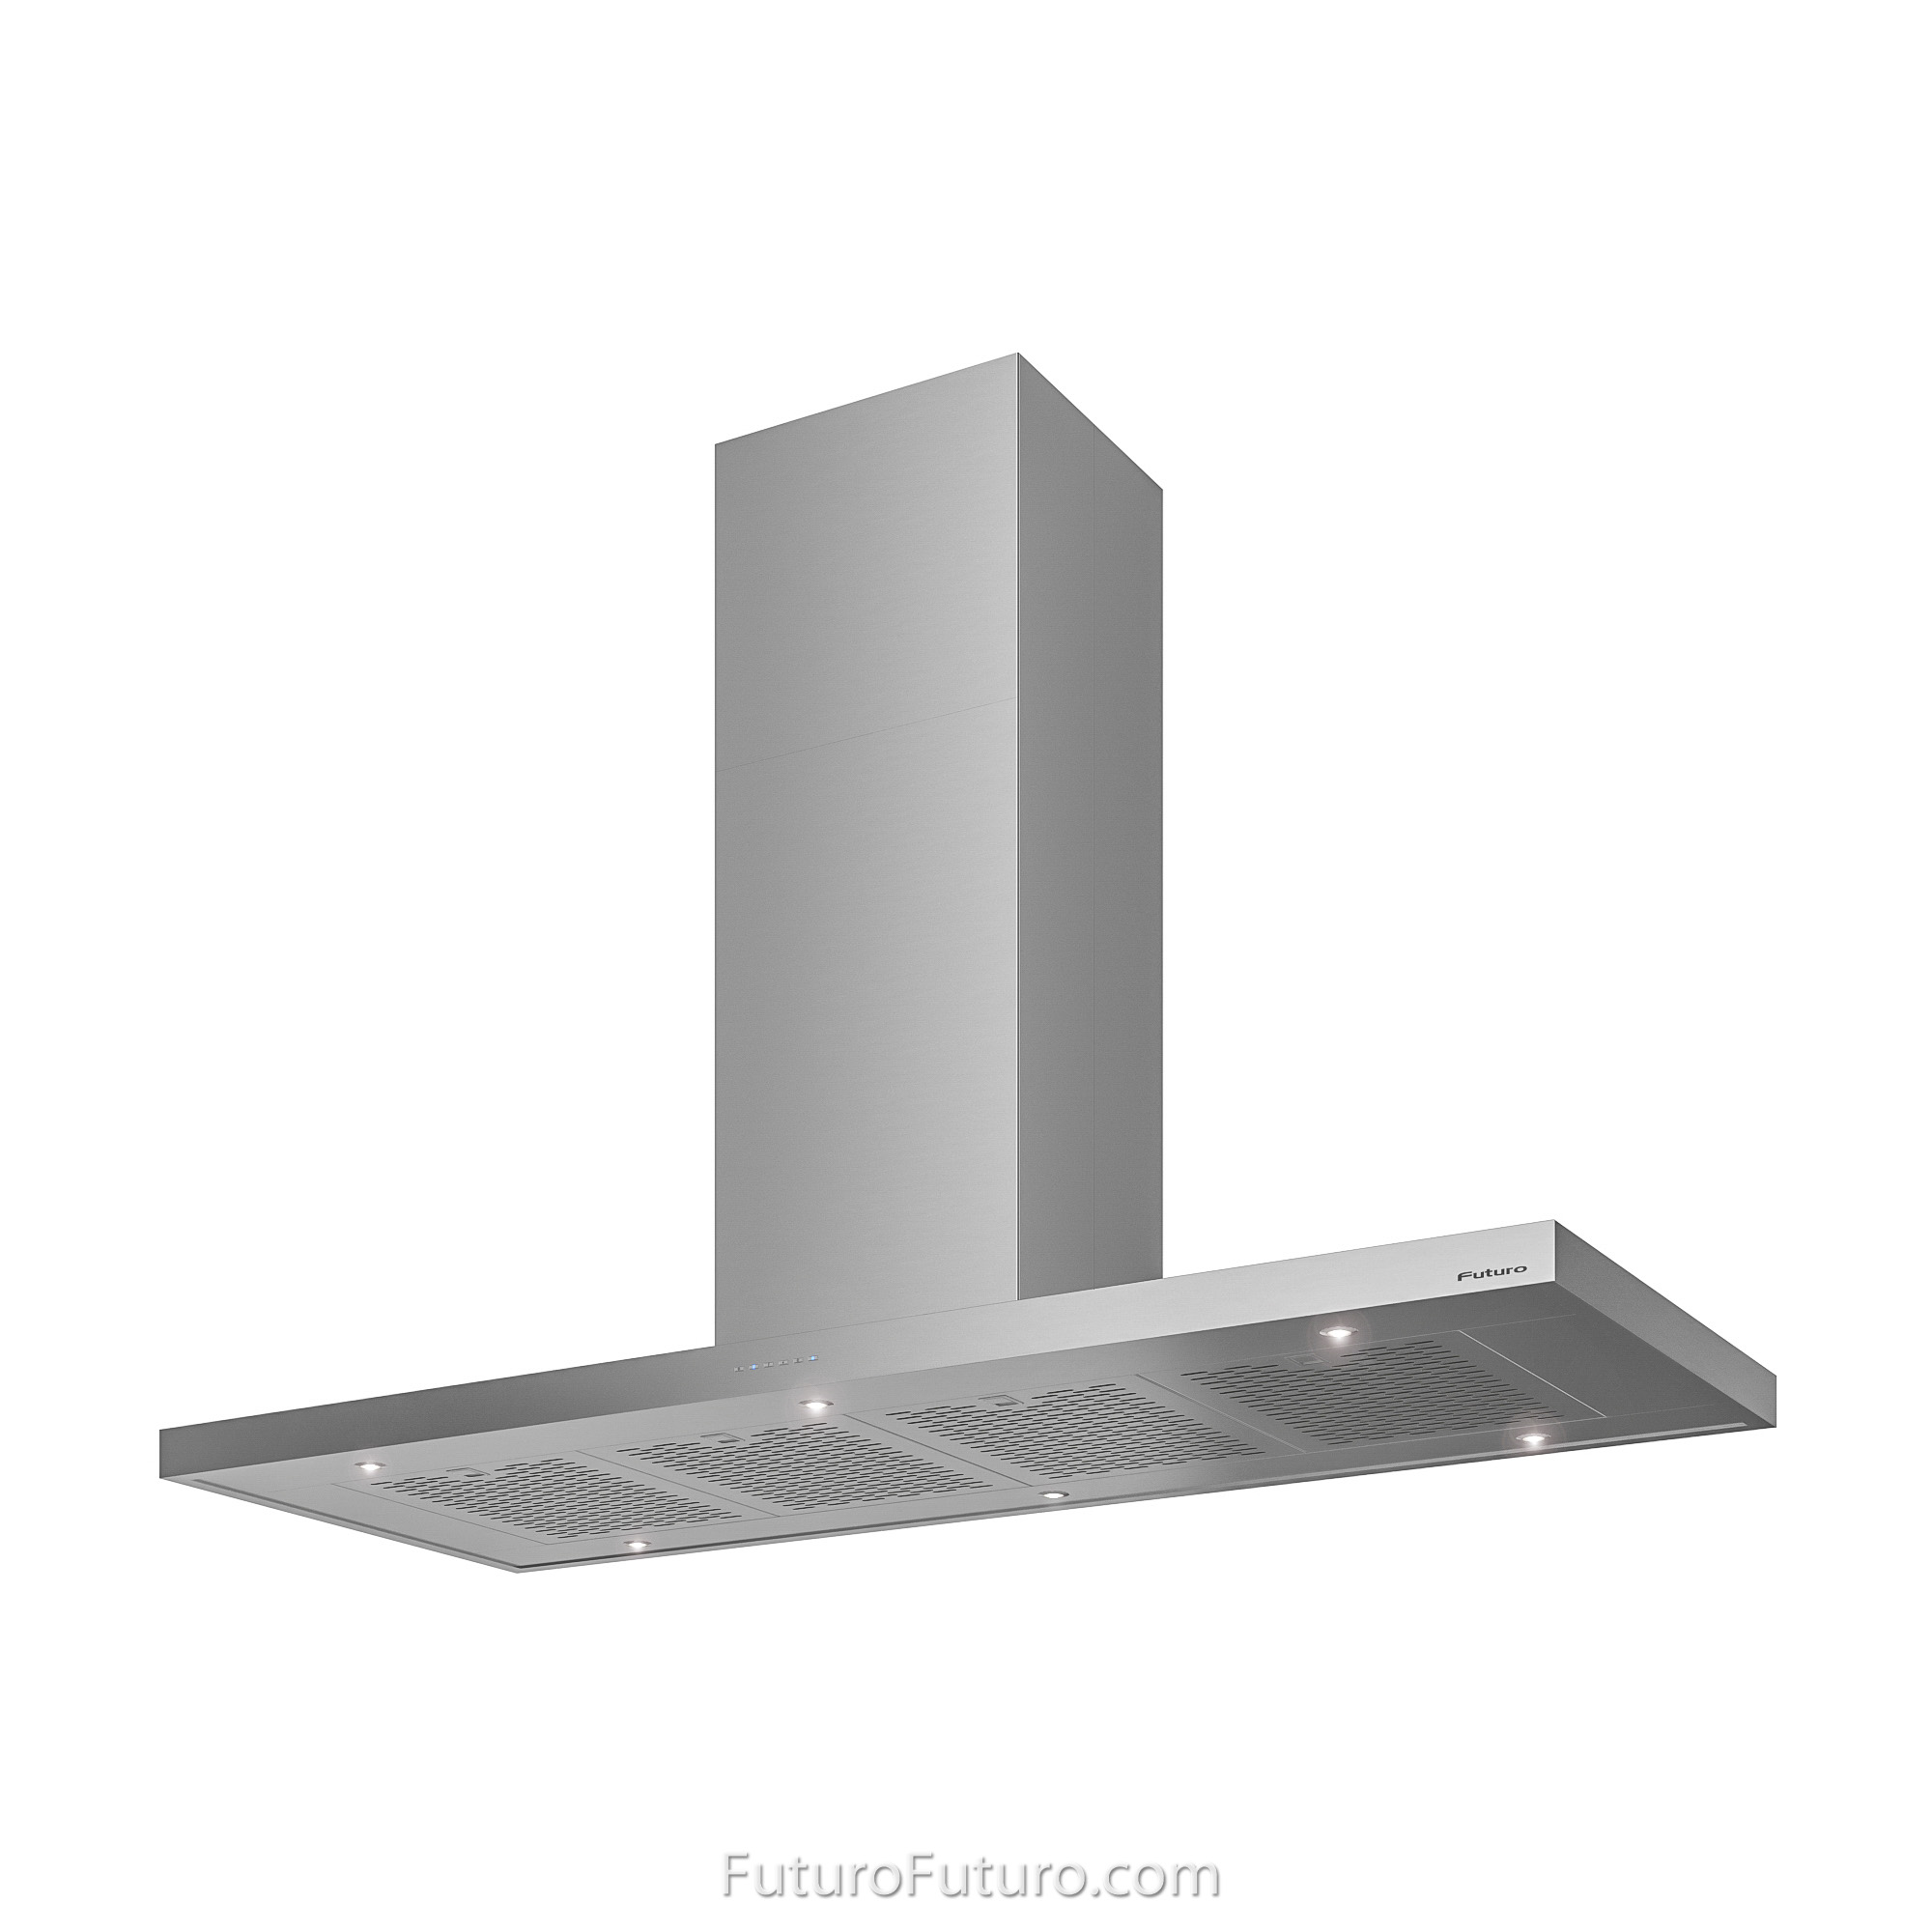 Dropship Stainless Steel Under Cabinet Range Hood Vent Cooking 230 CFM  Kitchen 3 Speed Cooker Hood to Sell Online at a Lower Price